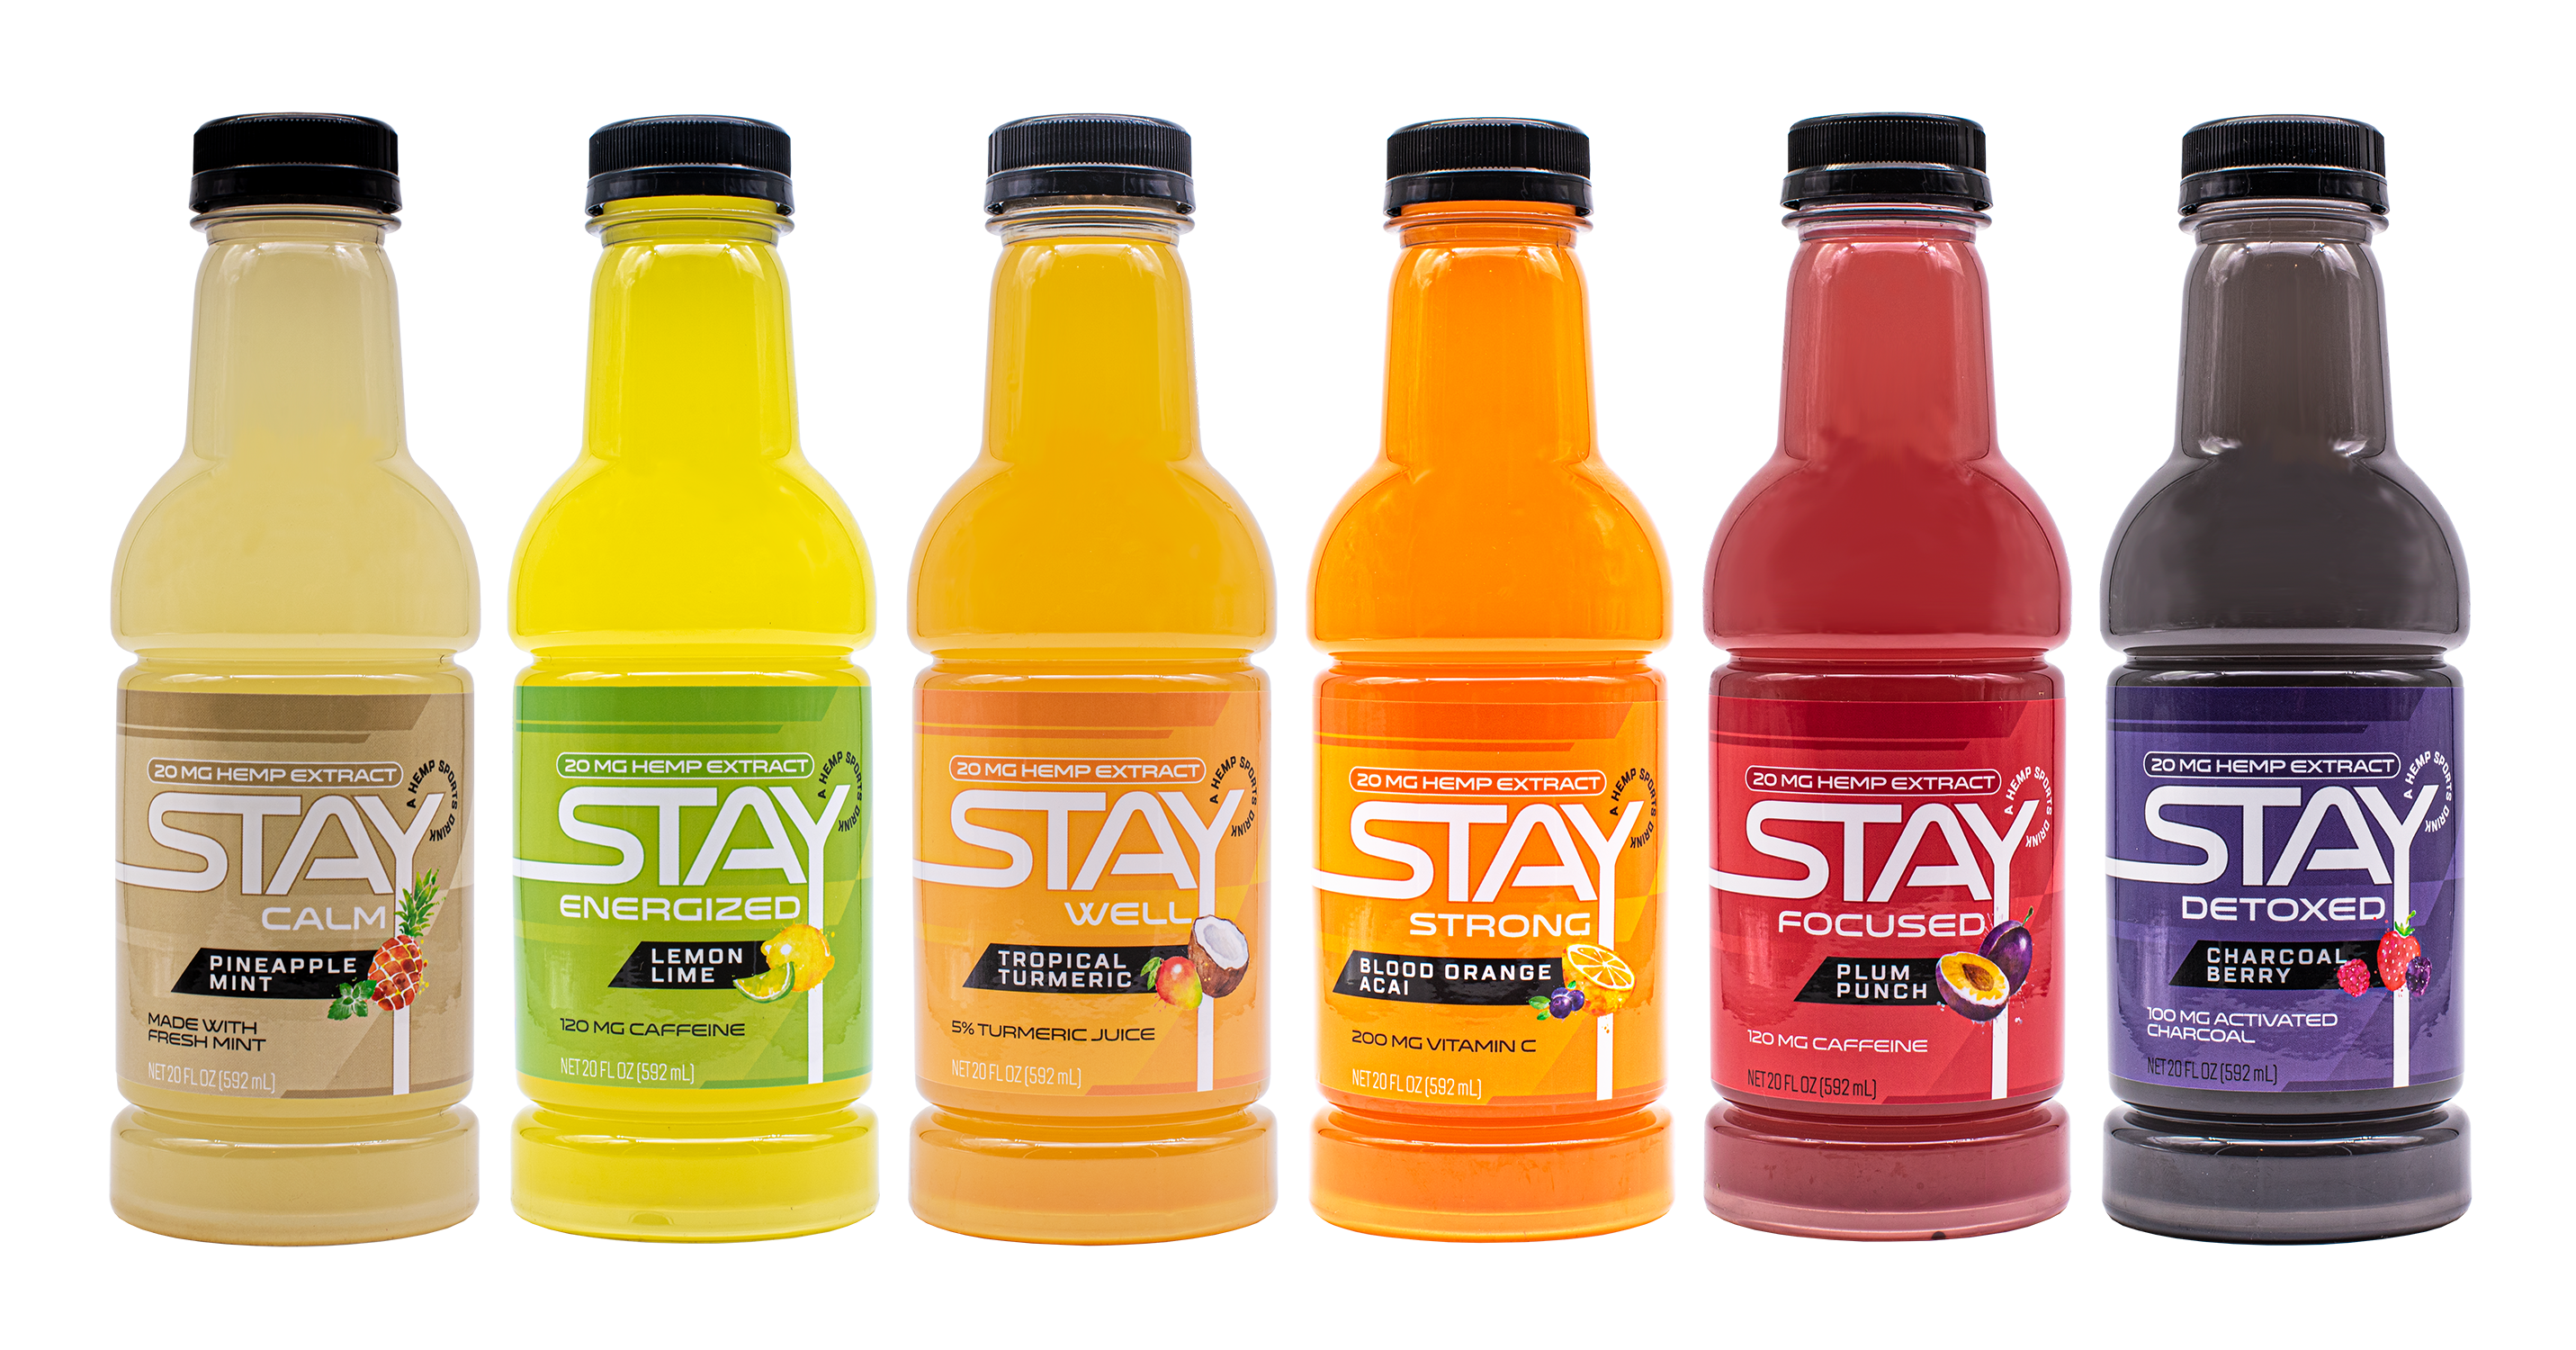 STAY Beverage Product Line 